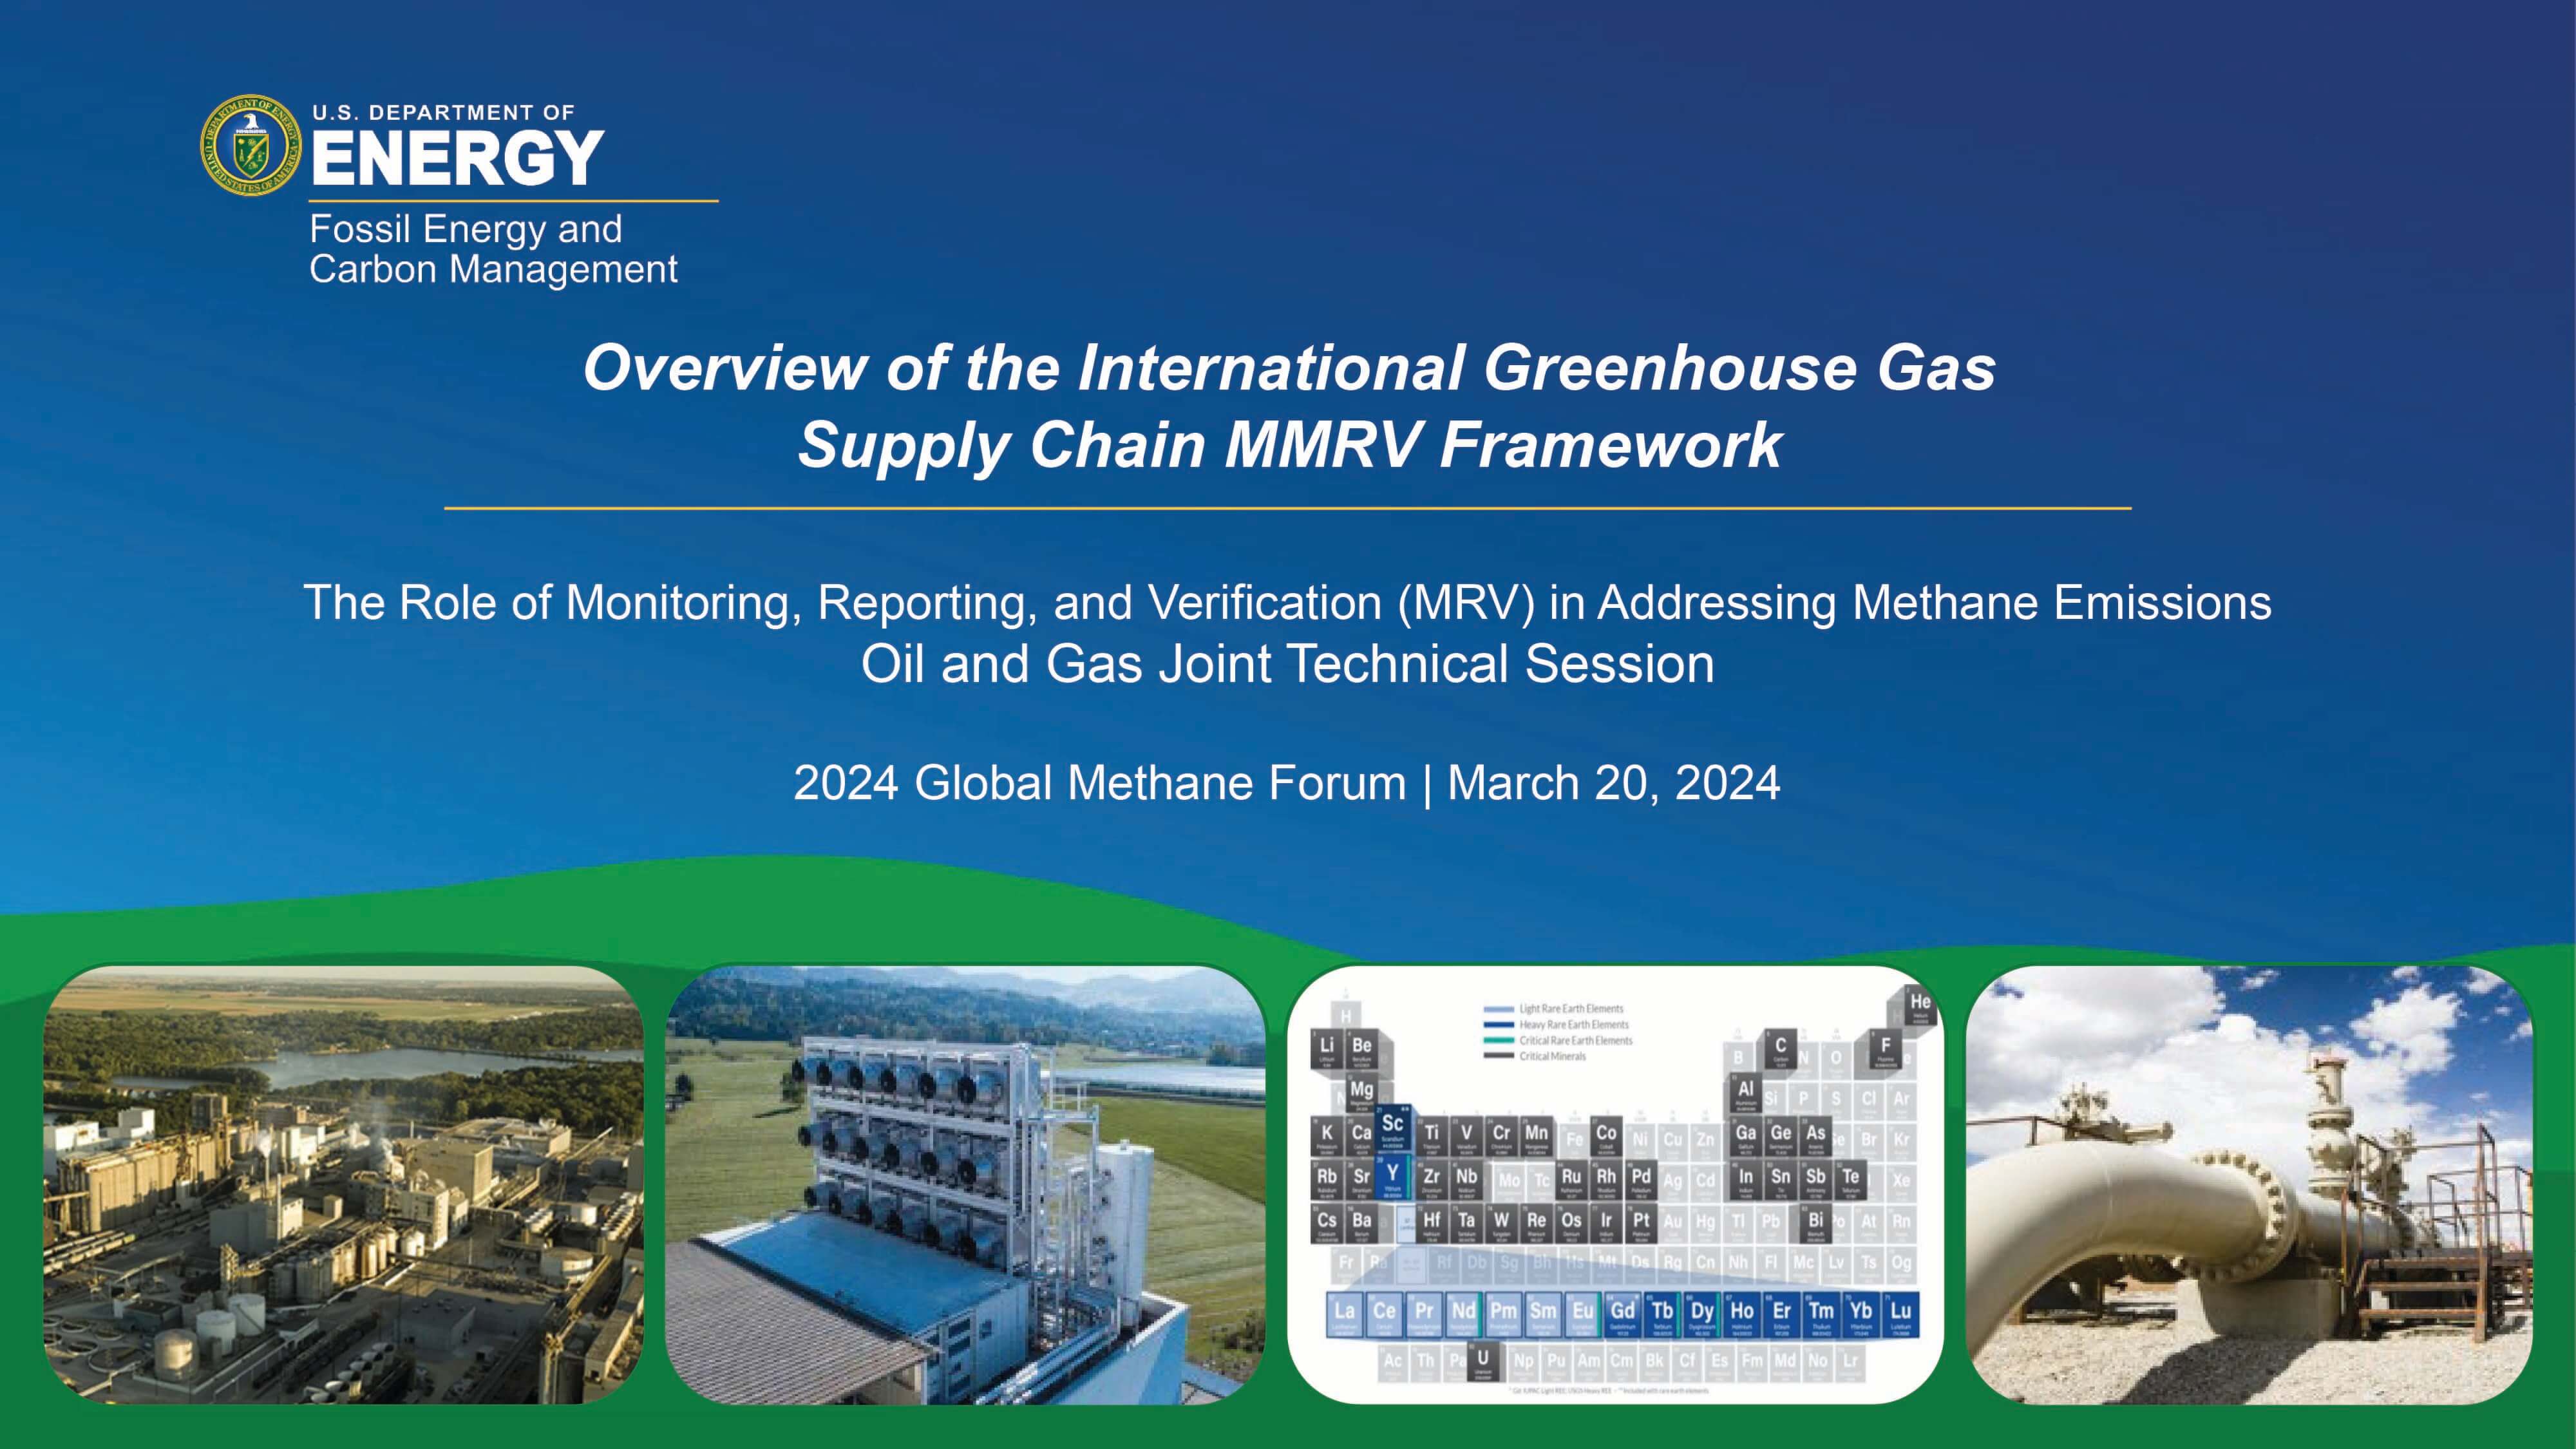 Overview of the International Greenhouse Gas Supply Chain MMRV Framework